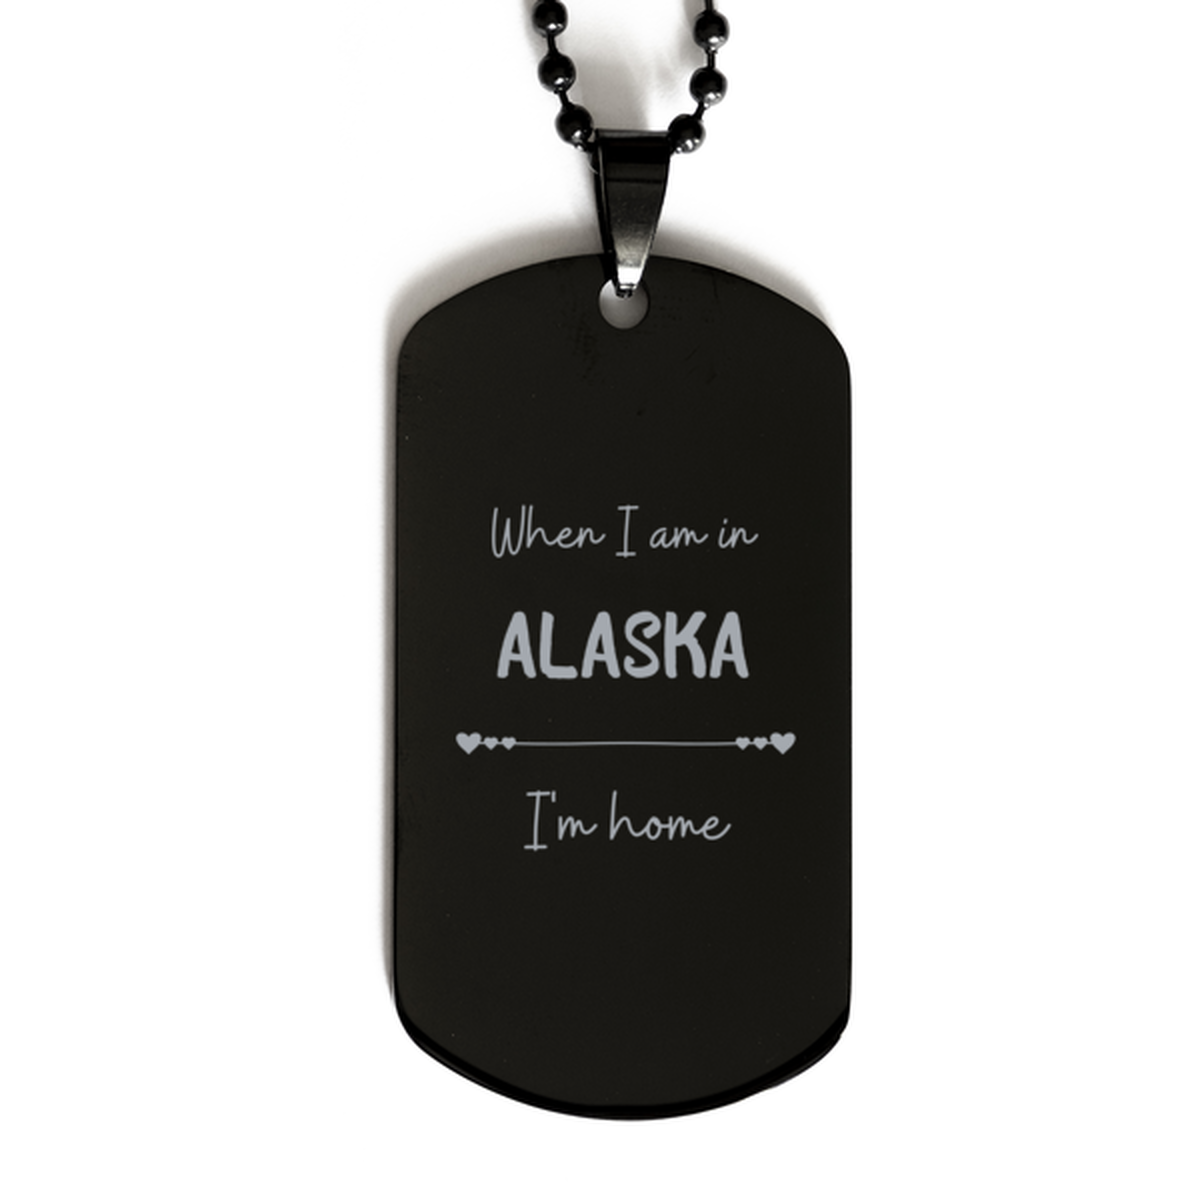 When I am in Alaska I'm home Black Dog Tag, Cheap Gifts For Alaska, State Alaska Birthday Gifts for Friends Coworker